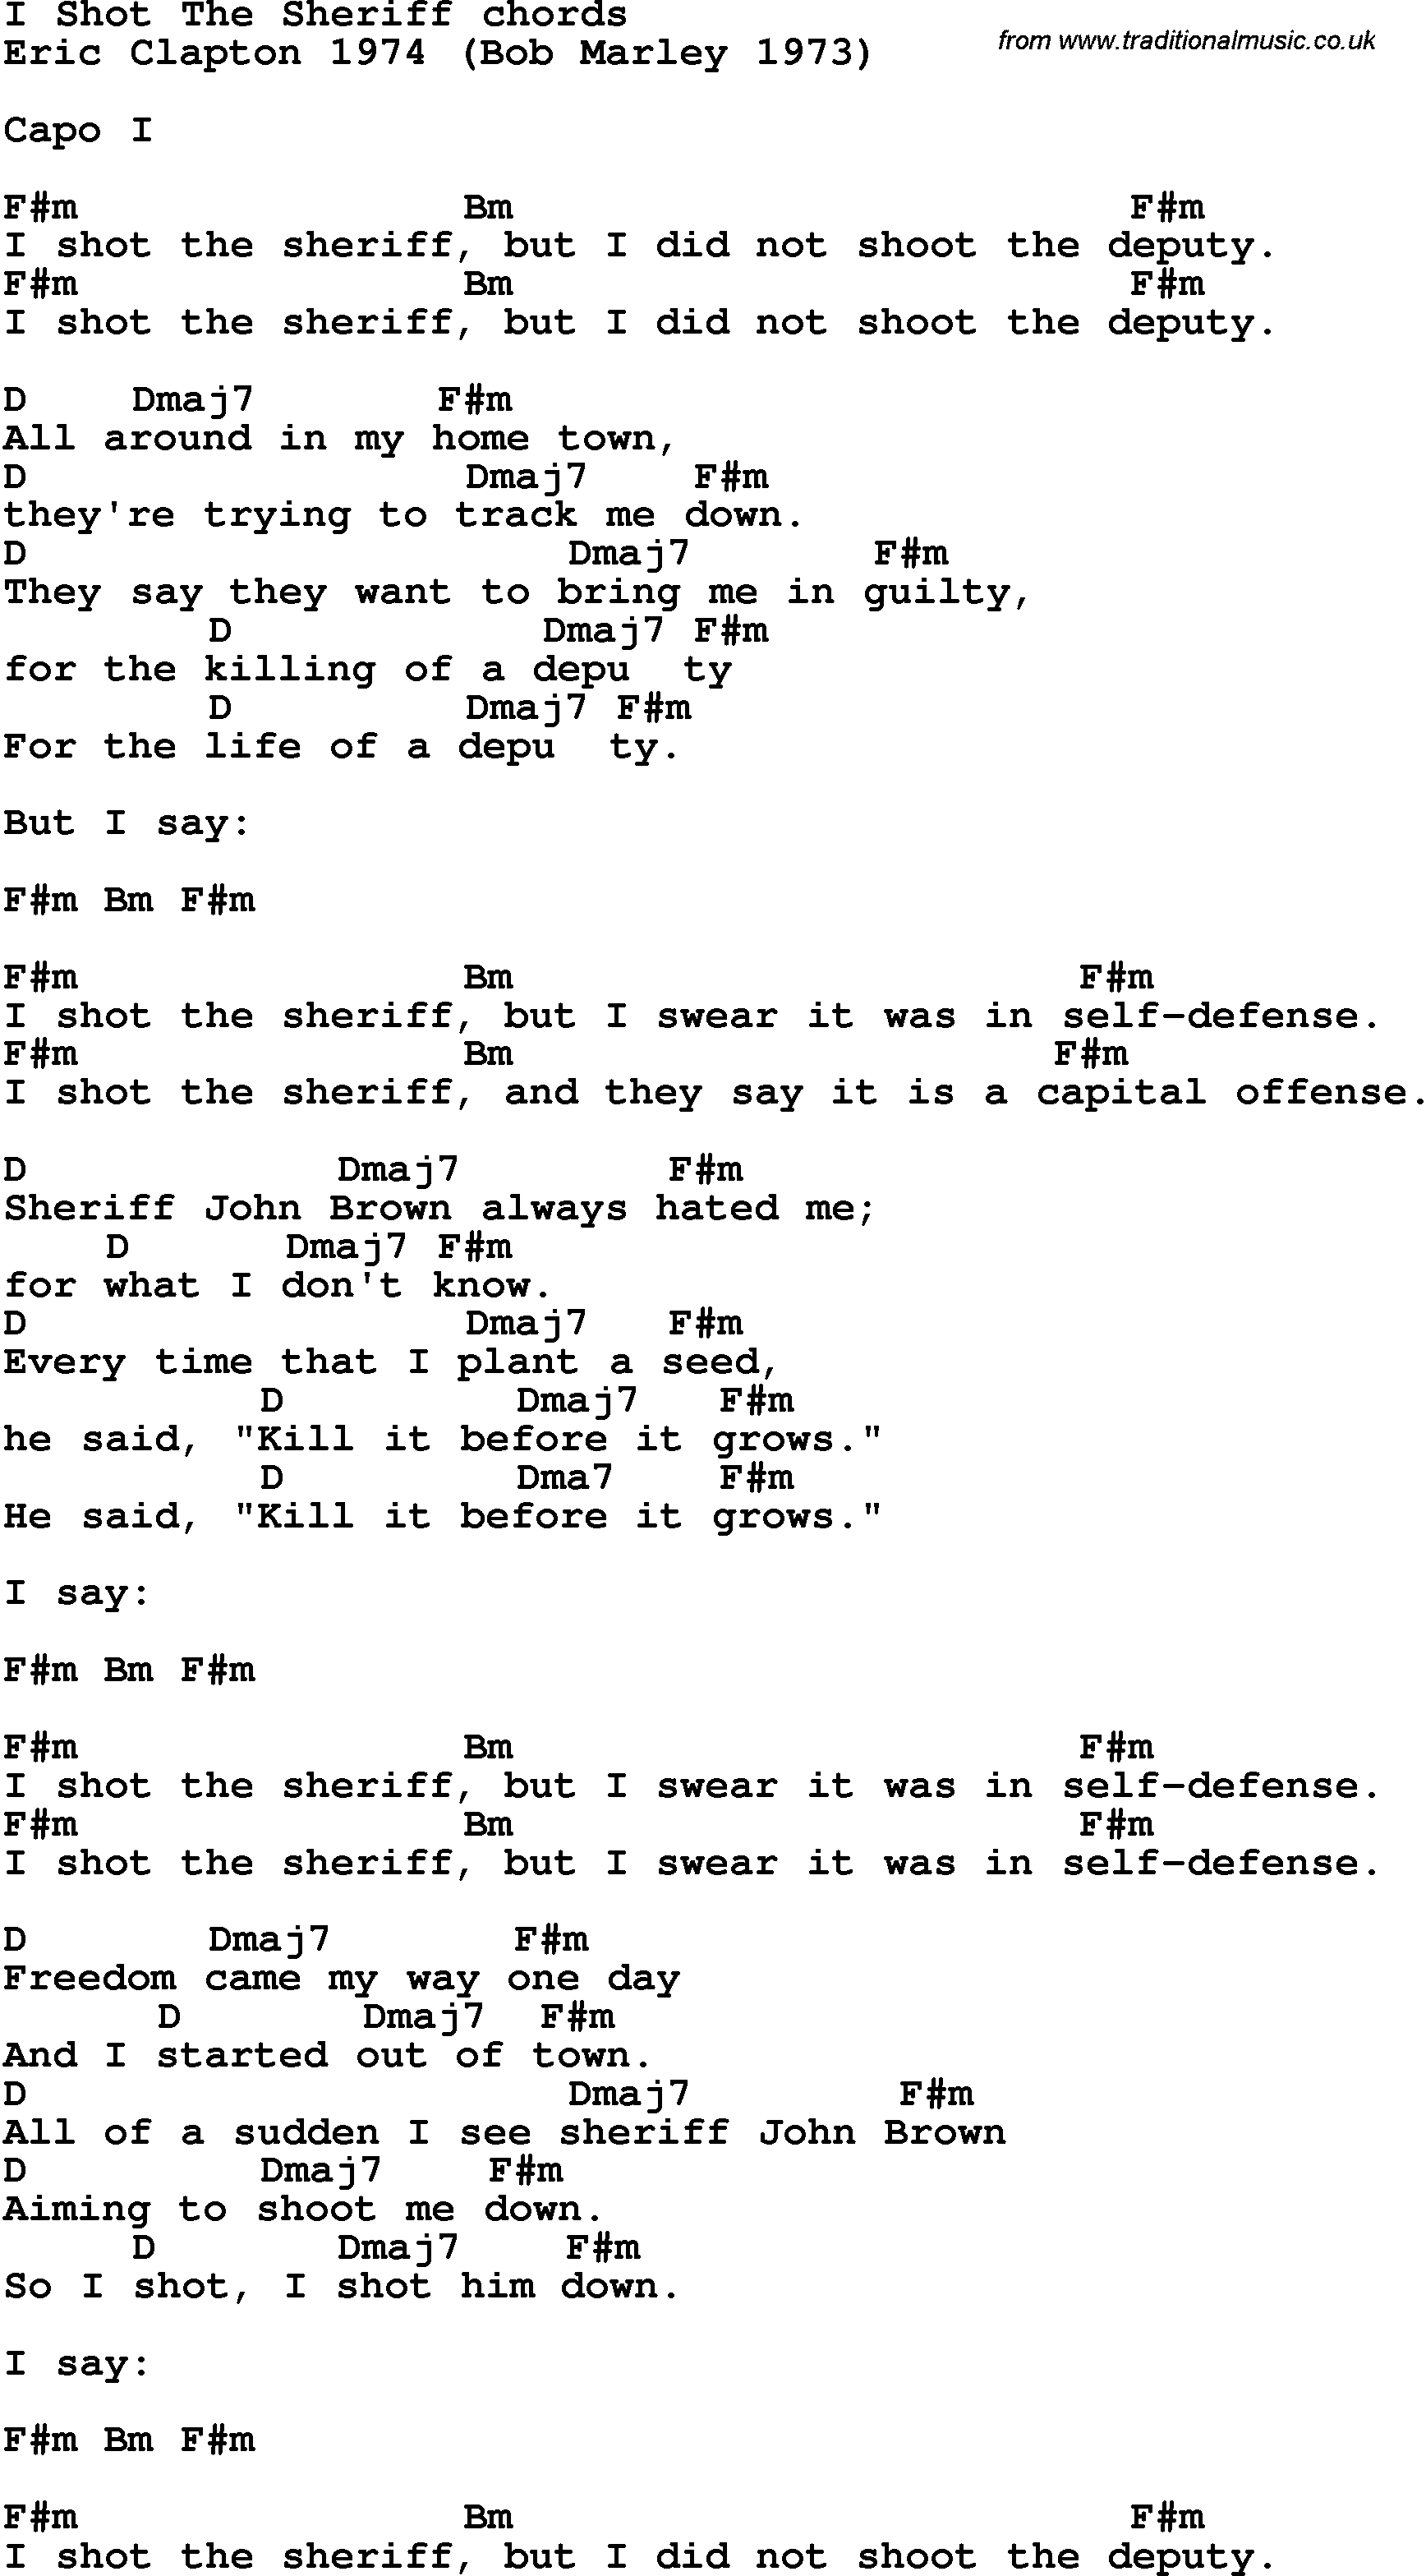 Song Lyrics with guitar chords for I Shot The Sheriff